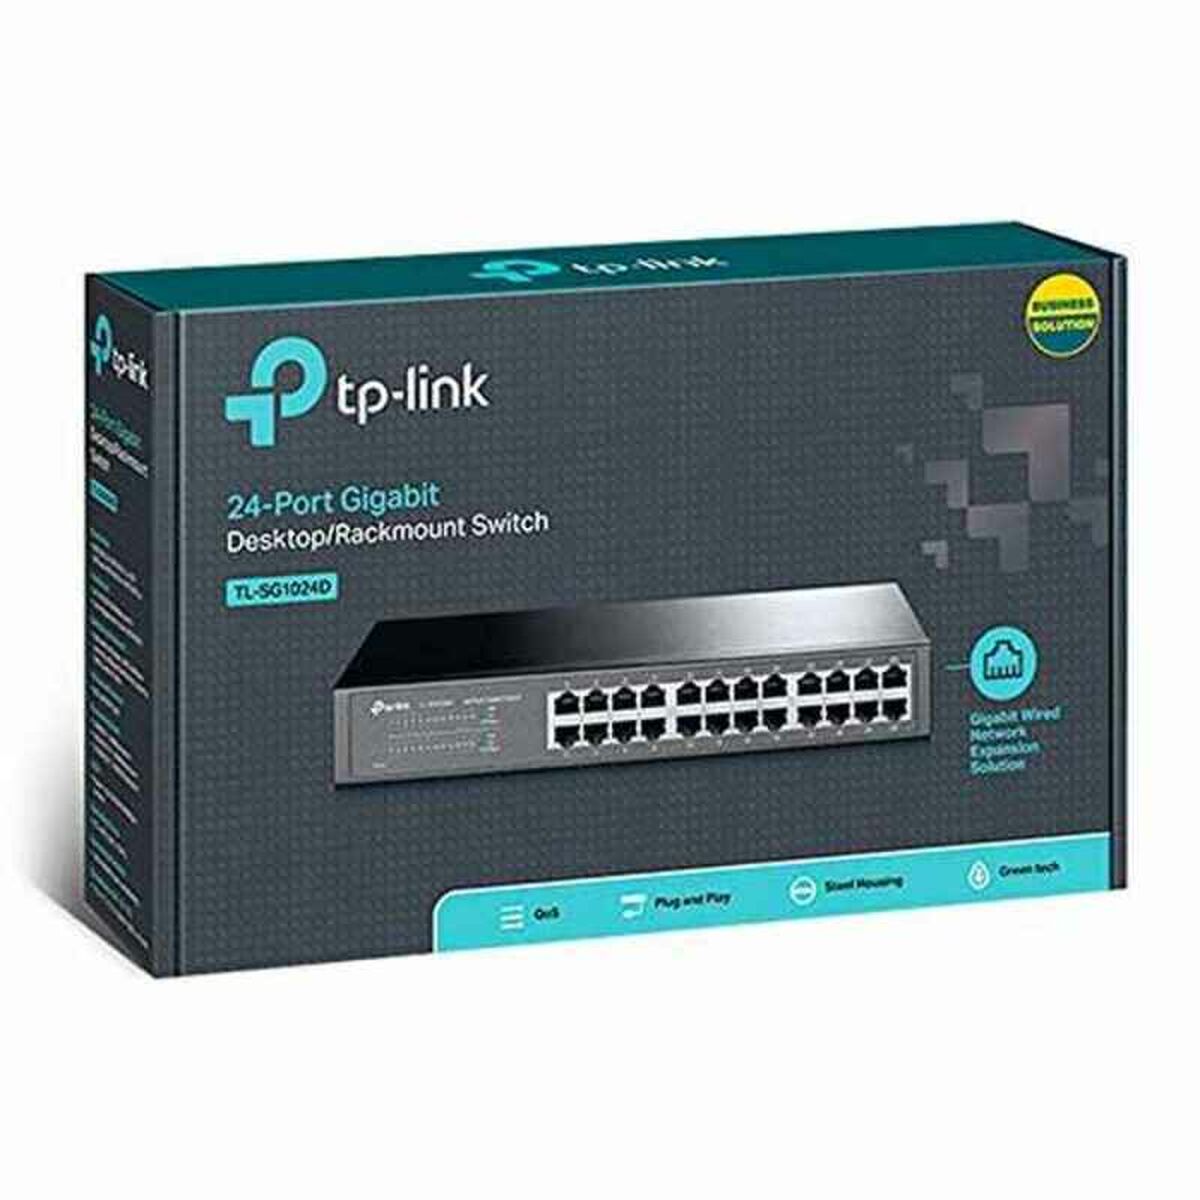 Cabinet Switch TP-Link TL-SG1024D(UK) 24P Gigabit, TP-Link, Computing, Network devices, cabinet-switch-tp-link-tl-sg1024duk-24p-gigabit, Brand_TP-Link, category-reference-2609, category-reference-2803, category-reference-2827, category-reference-t-19685, category-reference-t-19914, Condition_NEW, networks/wiring, Price_100 - 200, Teleworking, RiotNook